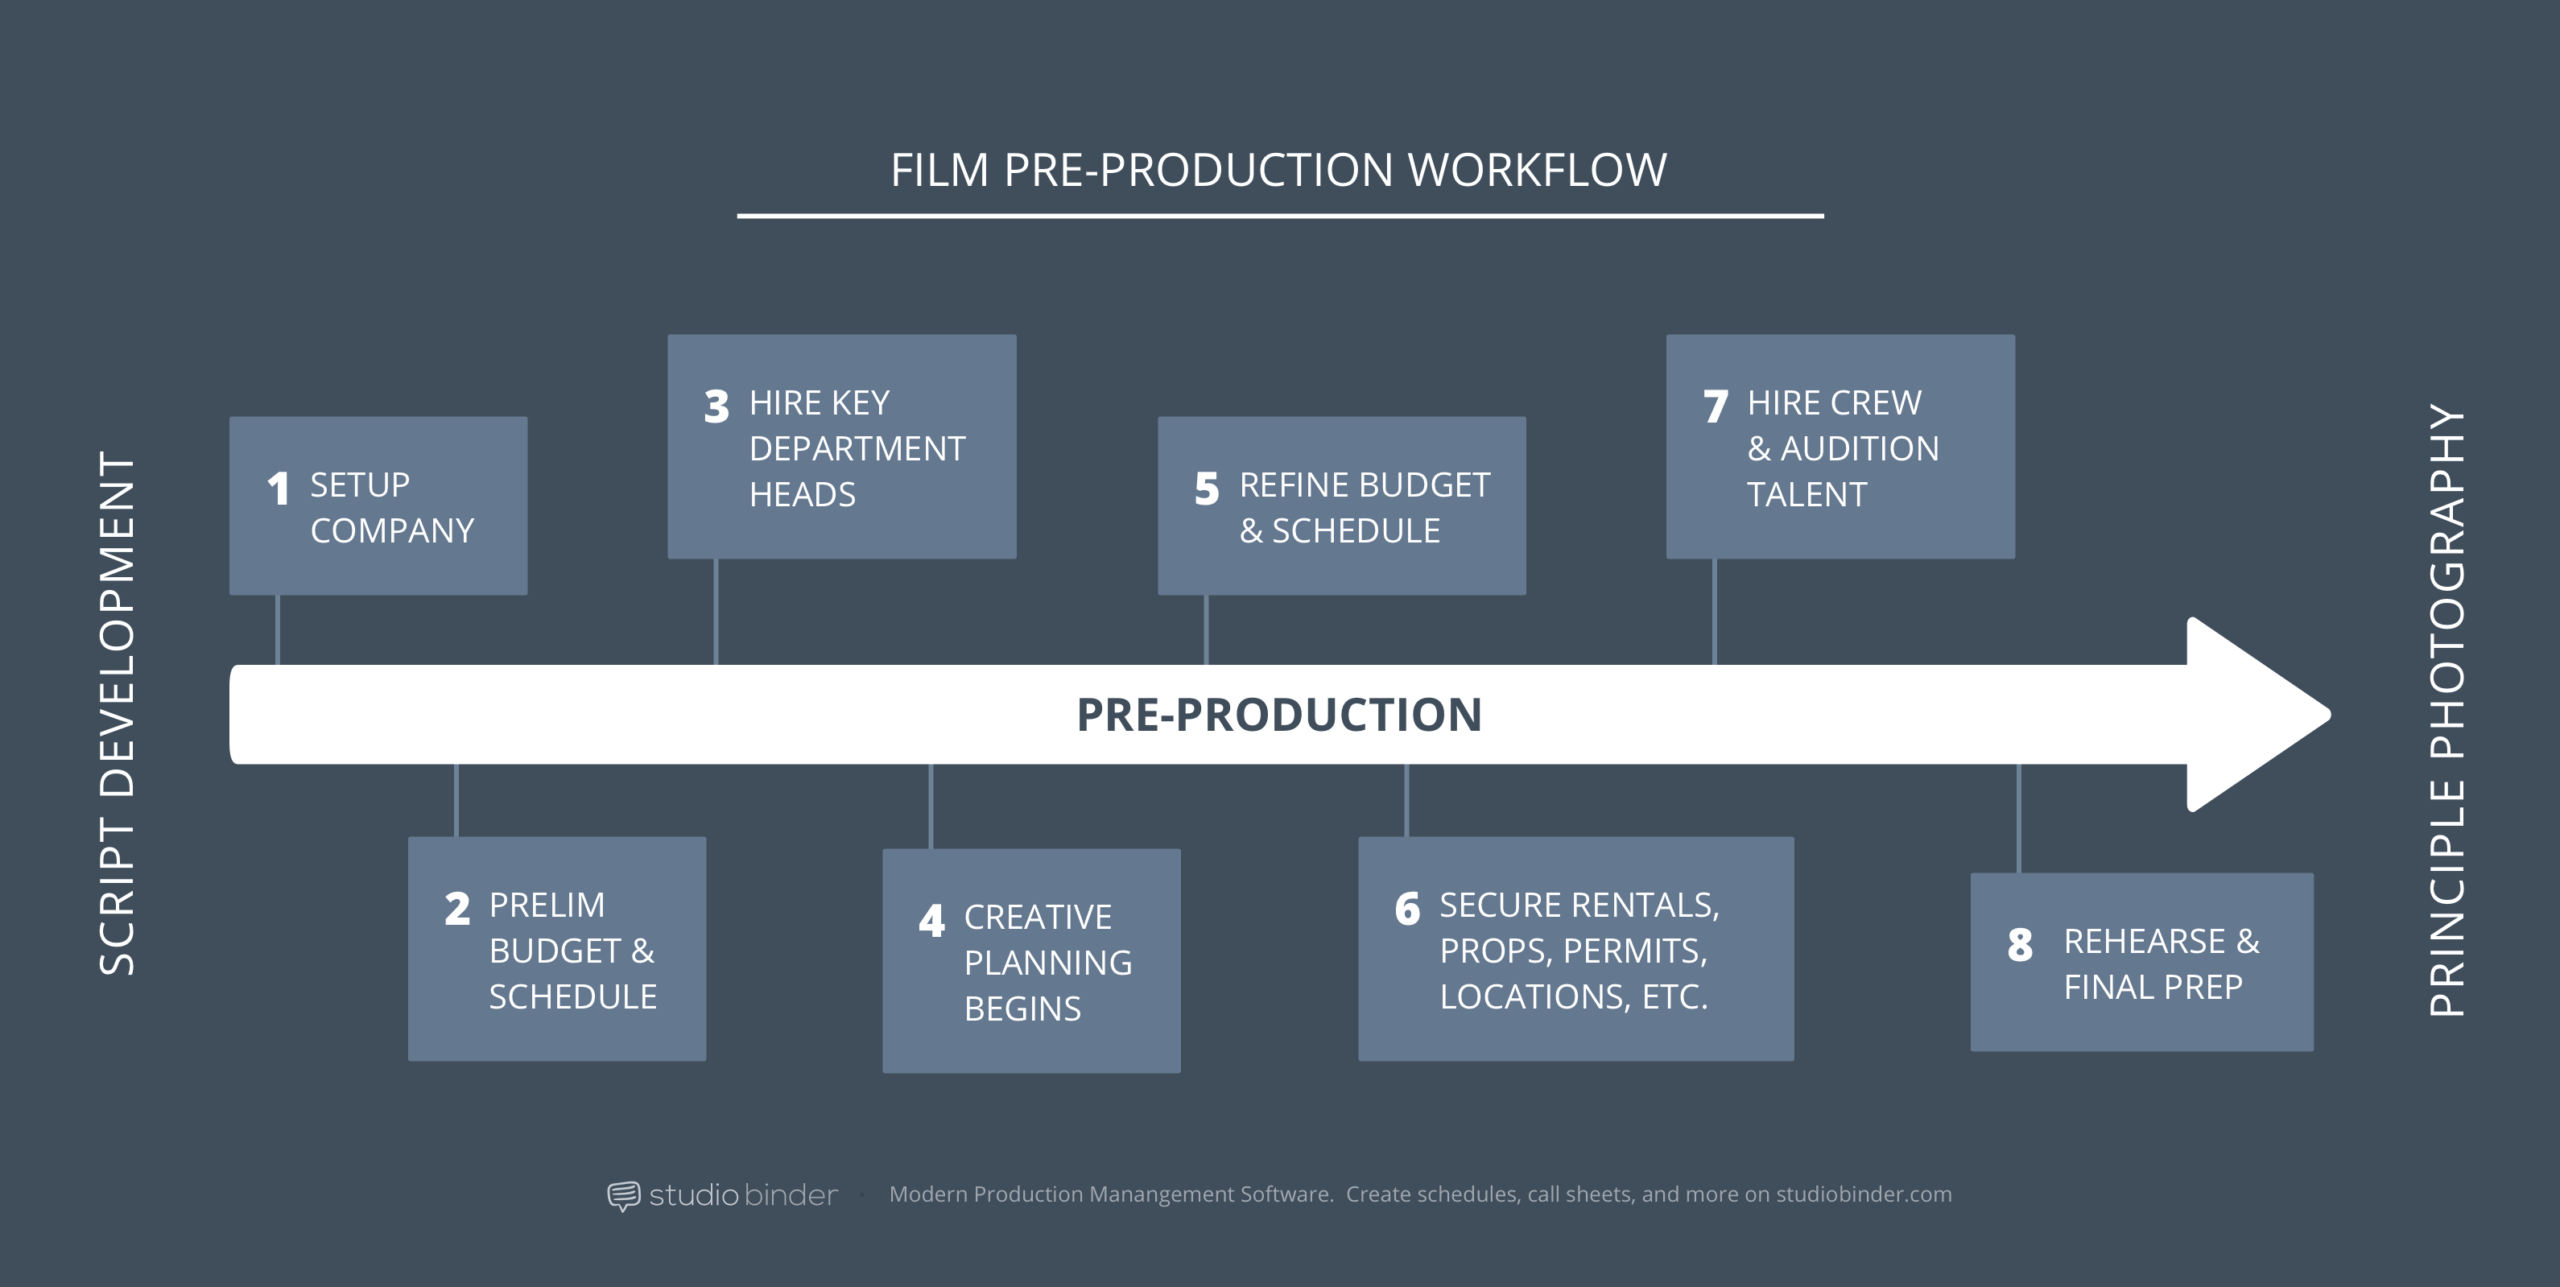 How To Produce A Movie: The Pre-Production Process Explained